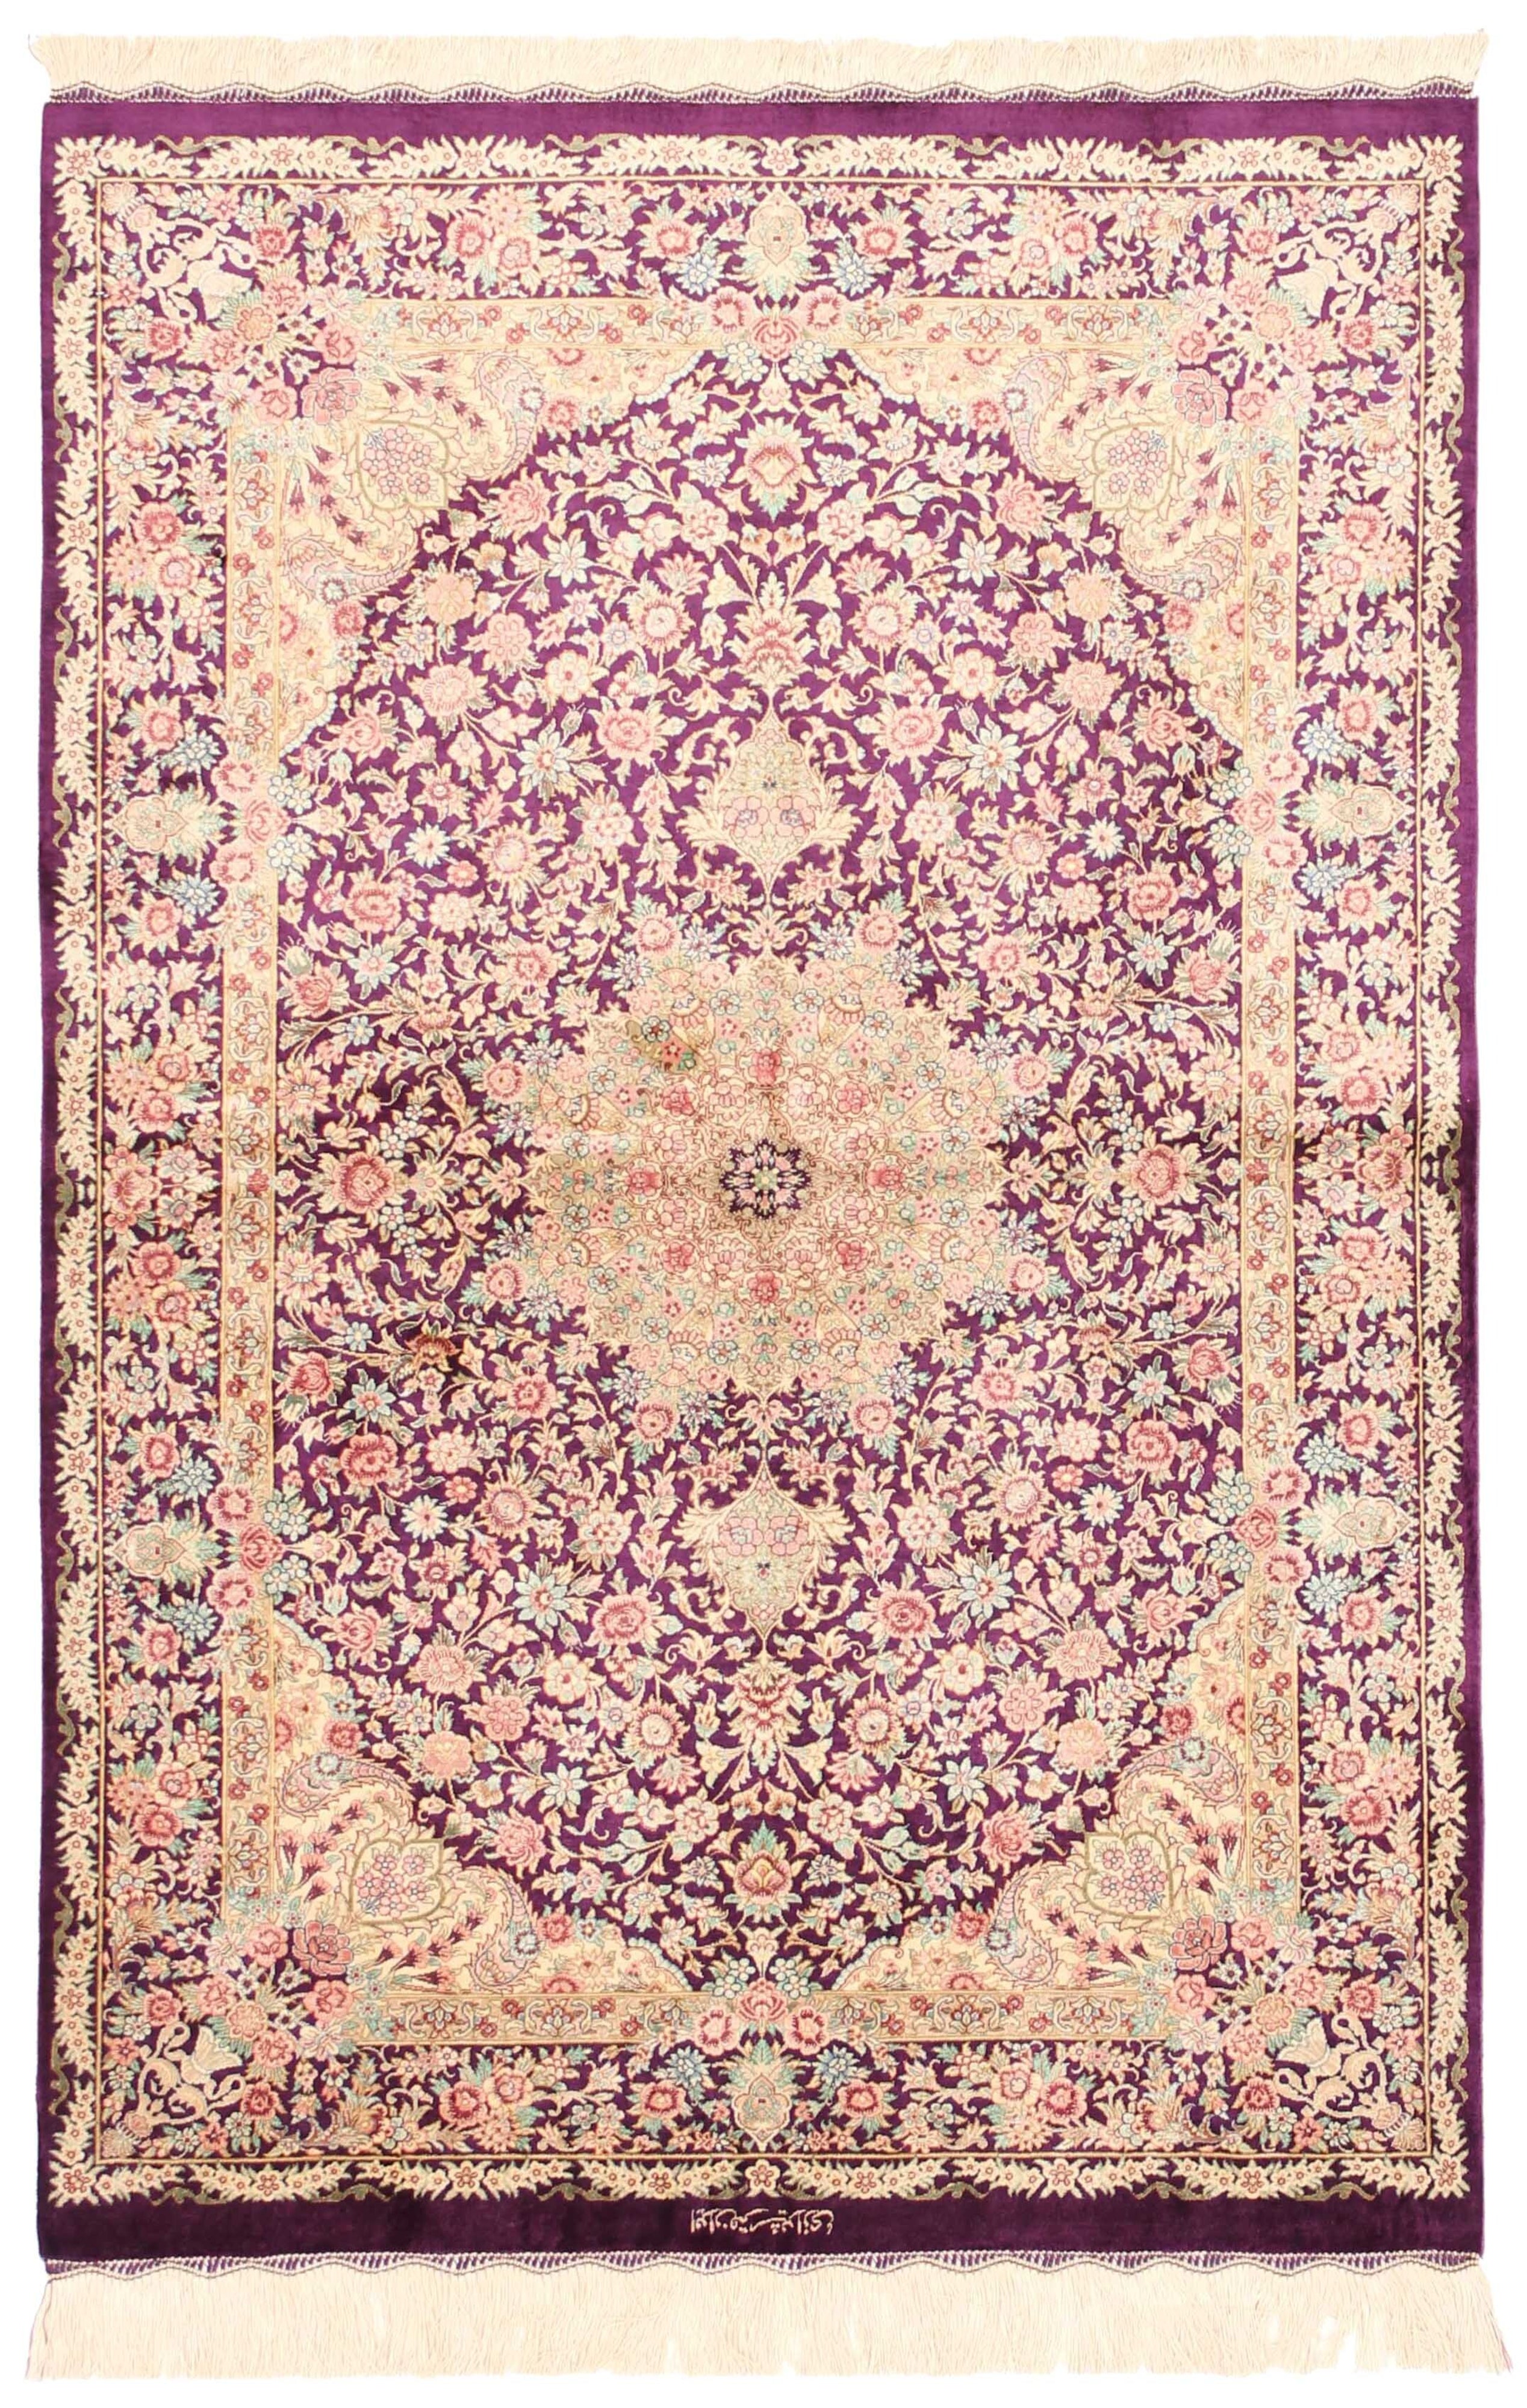 Authentic persian rug with a traditional floral design in purple